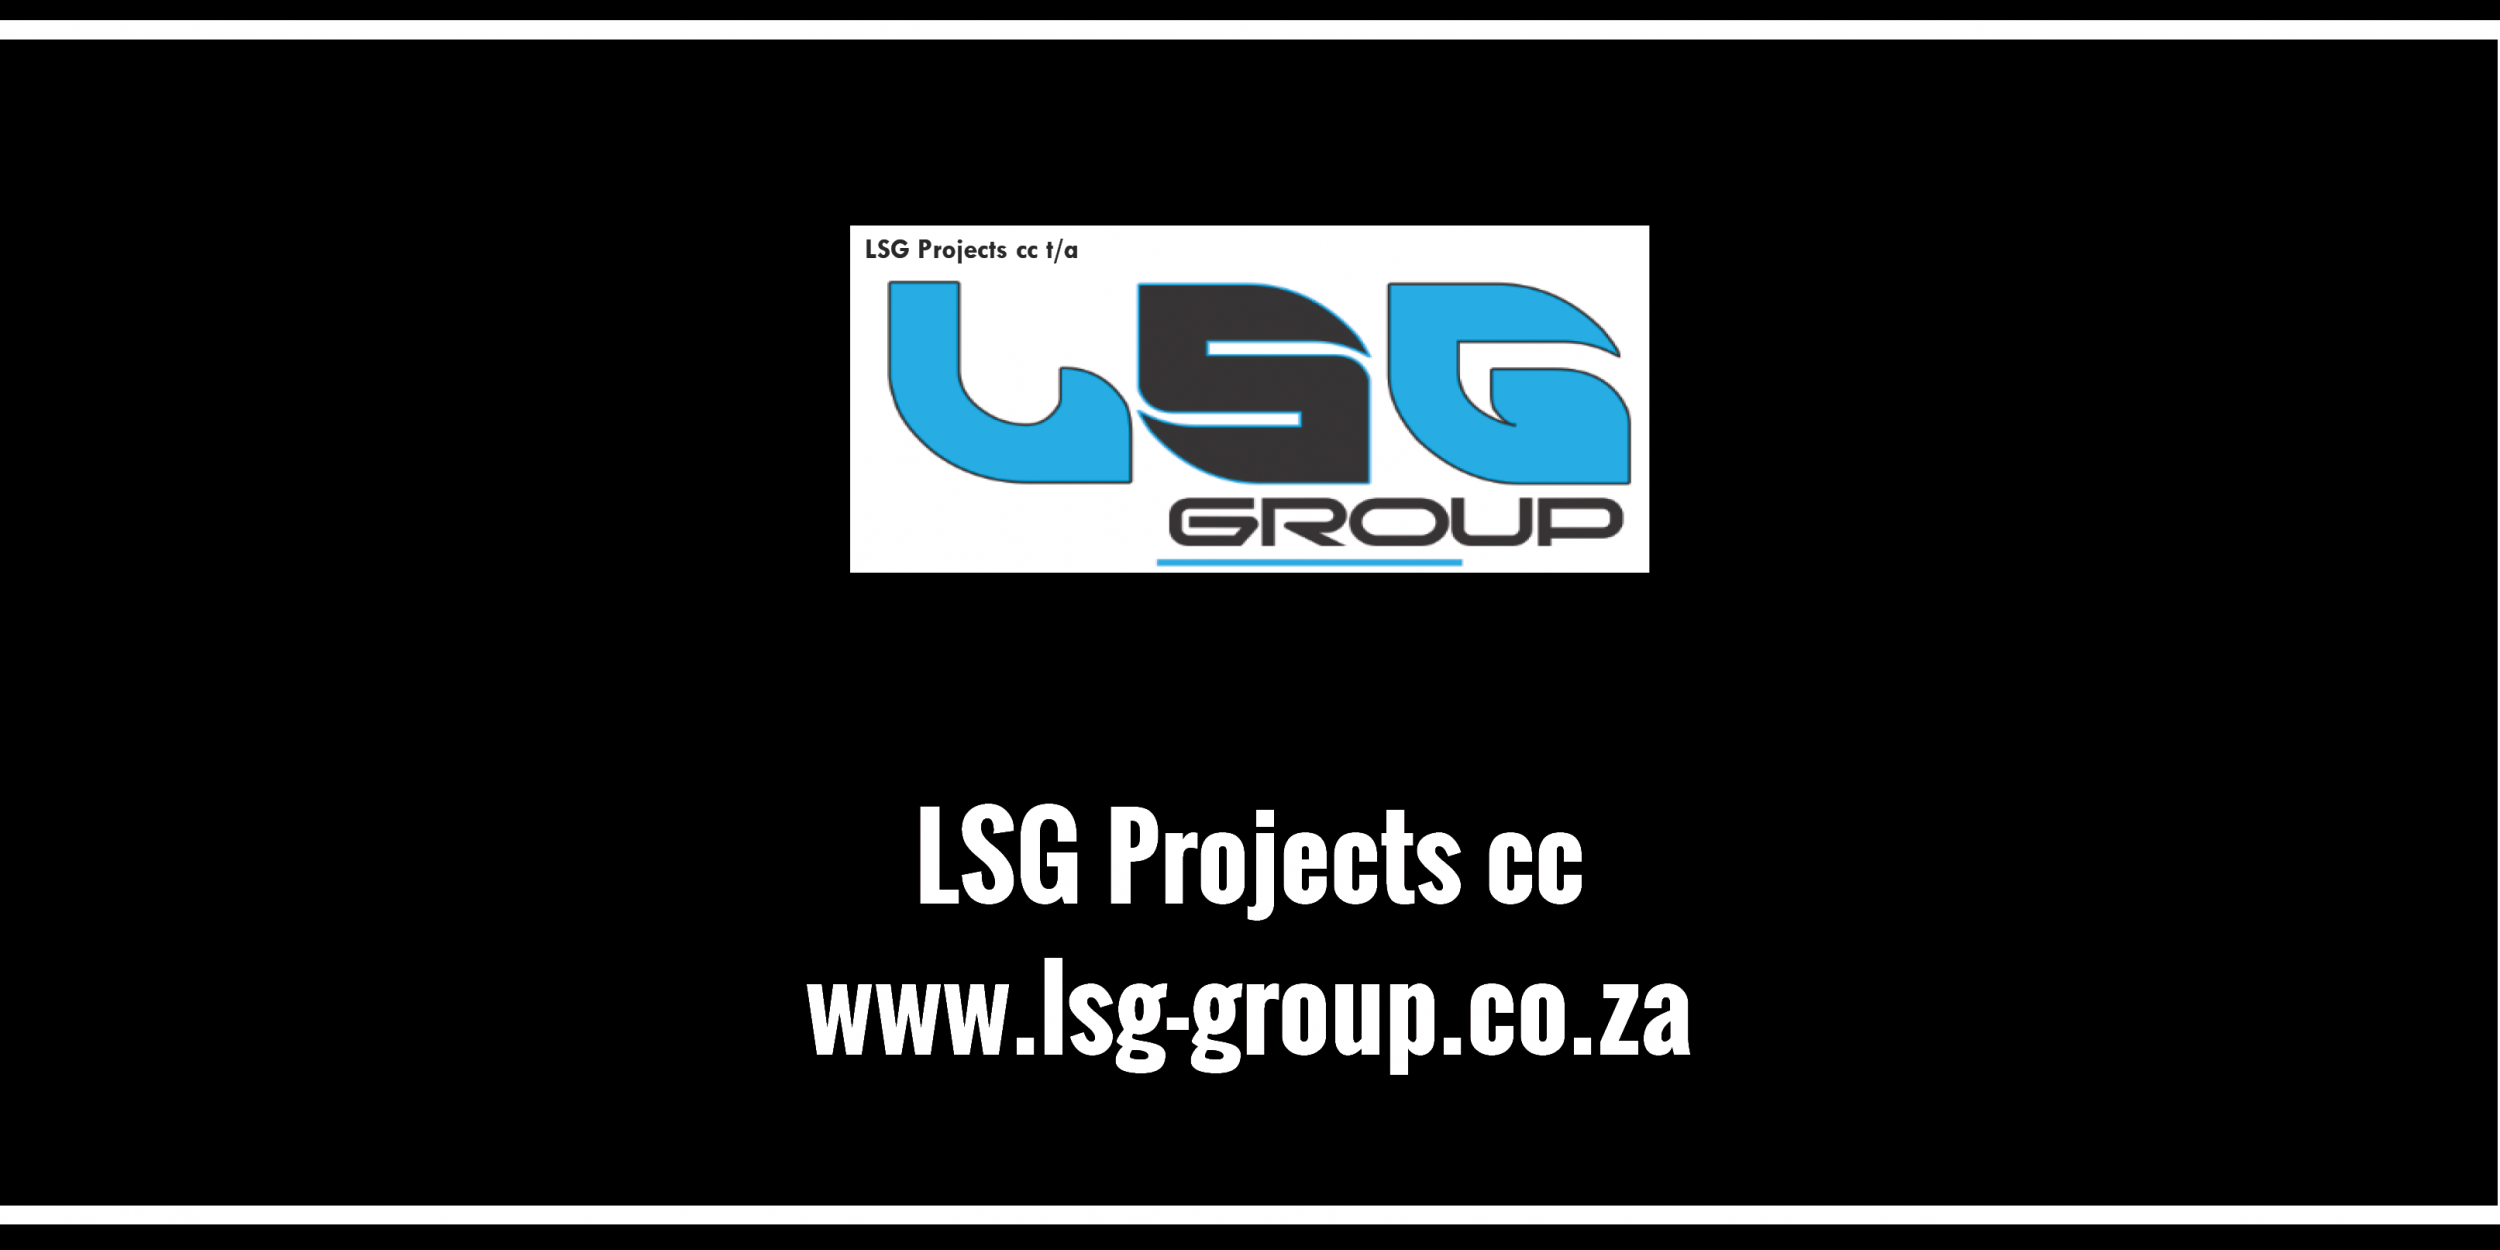 LSG Projects cc